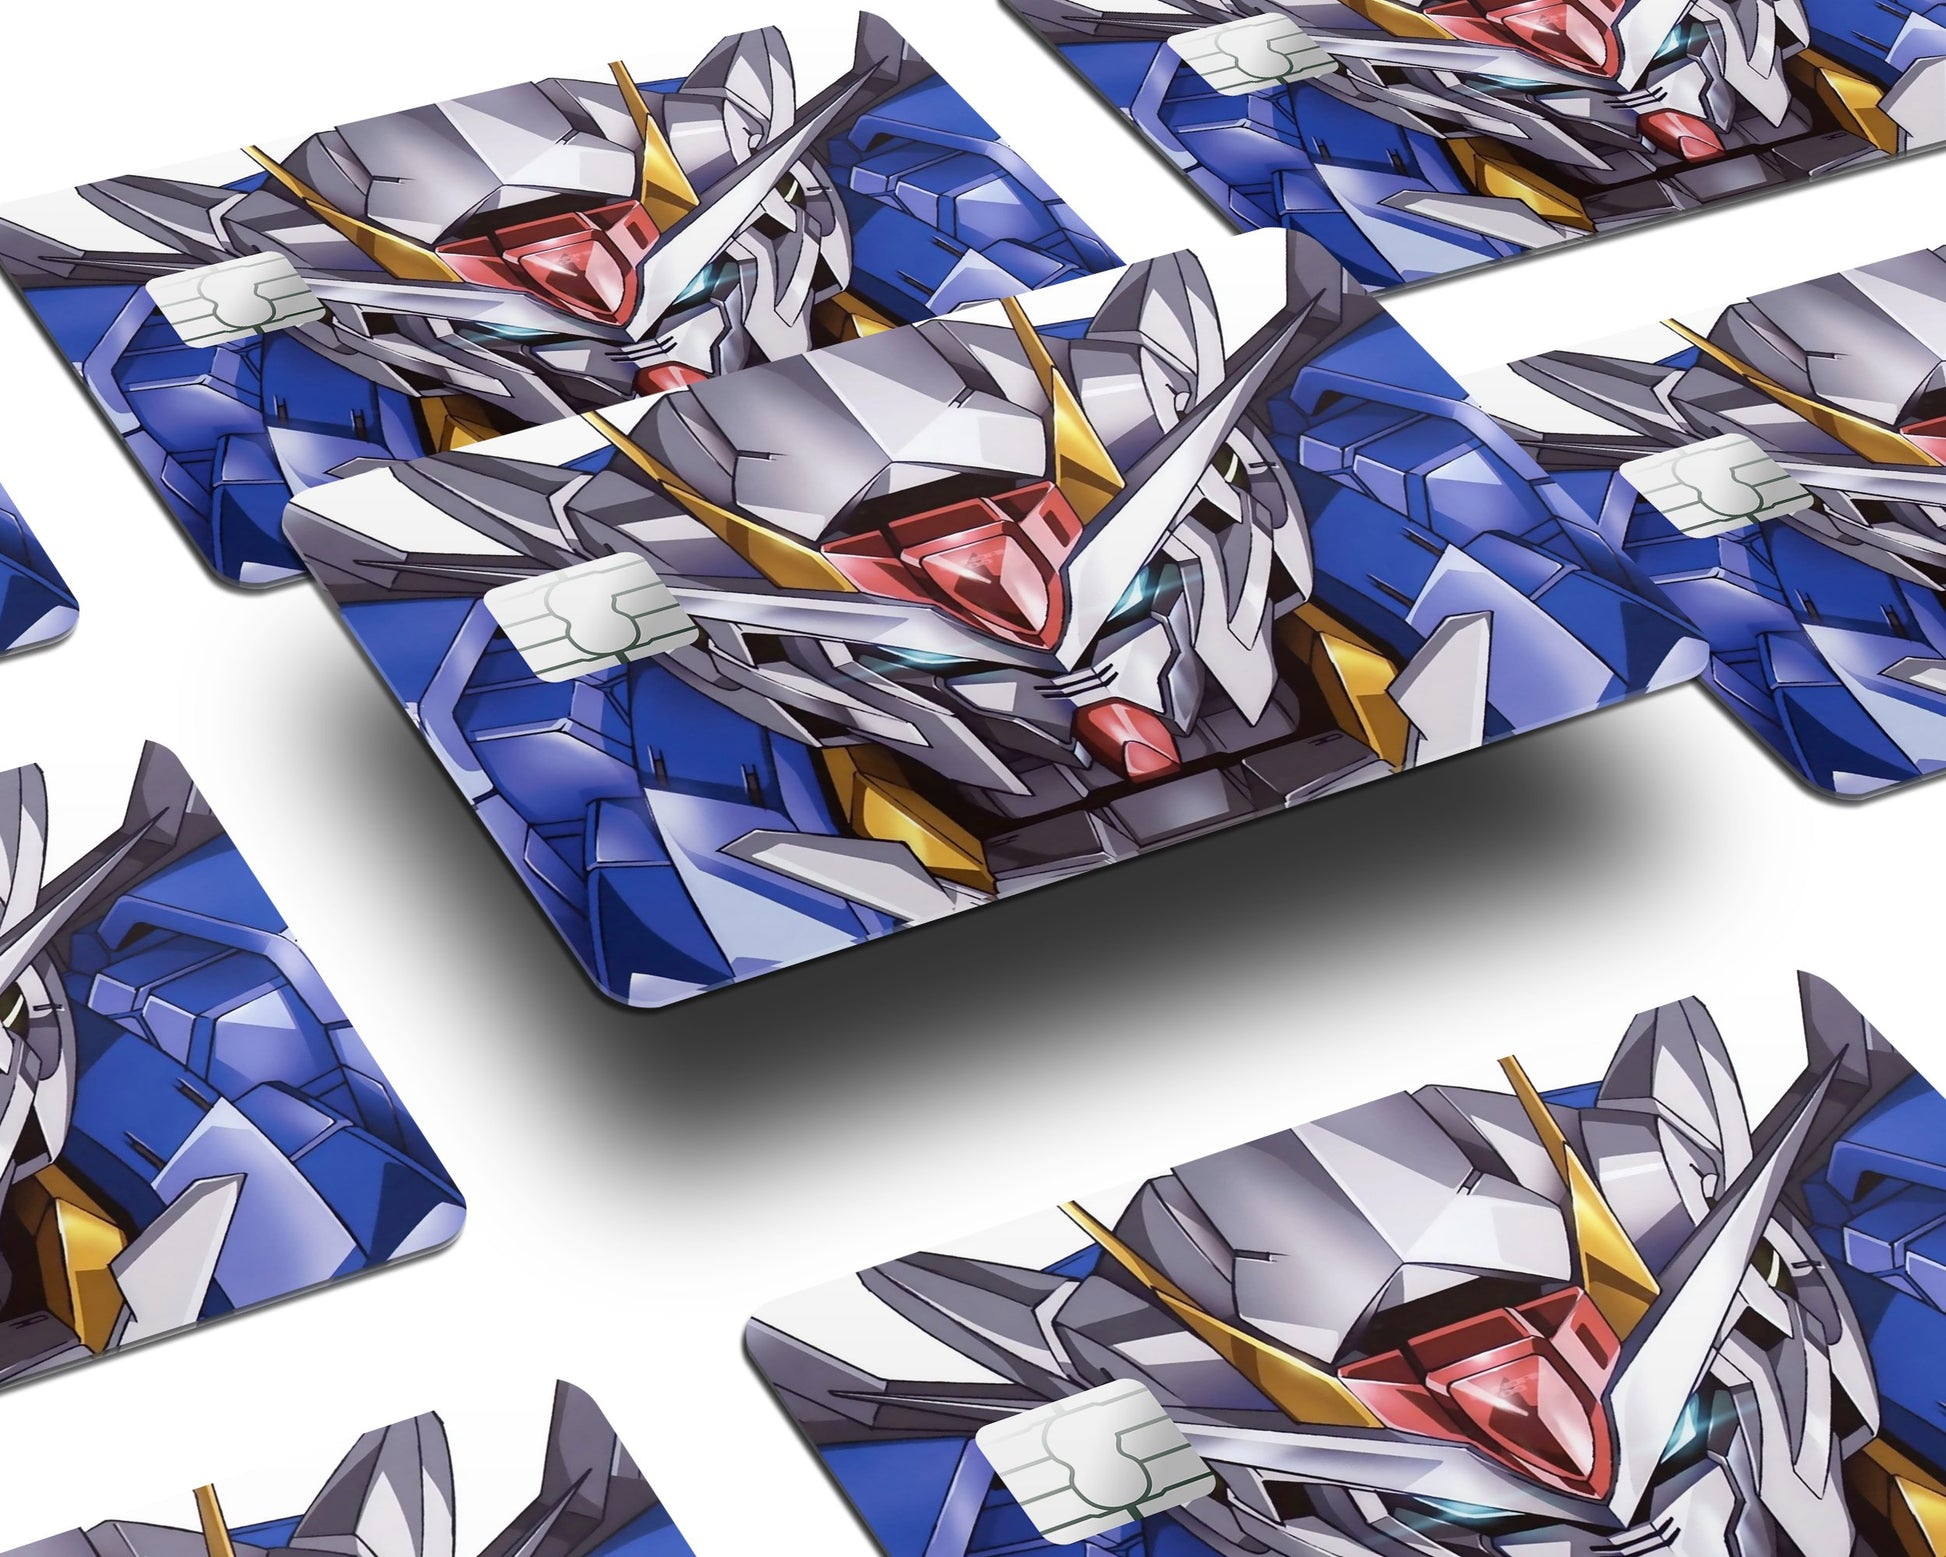 Mobile Suit Gundam Credit Card Skin - Wrapime - Anime Skins and Styles